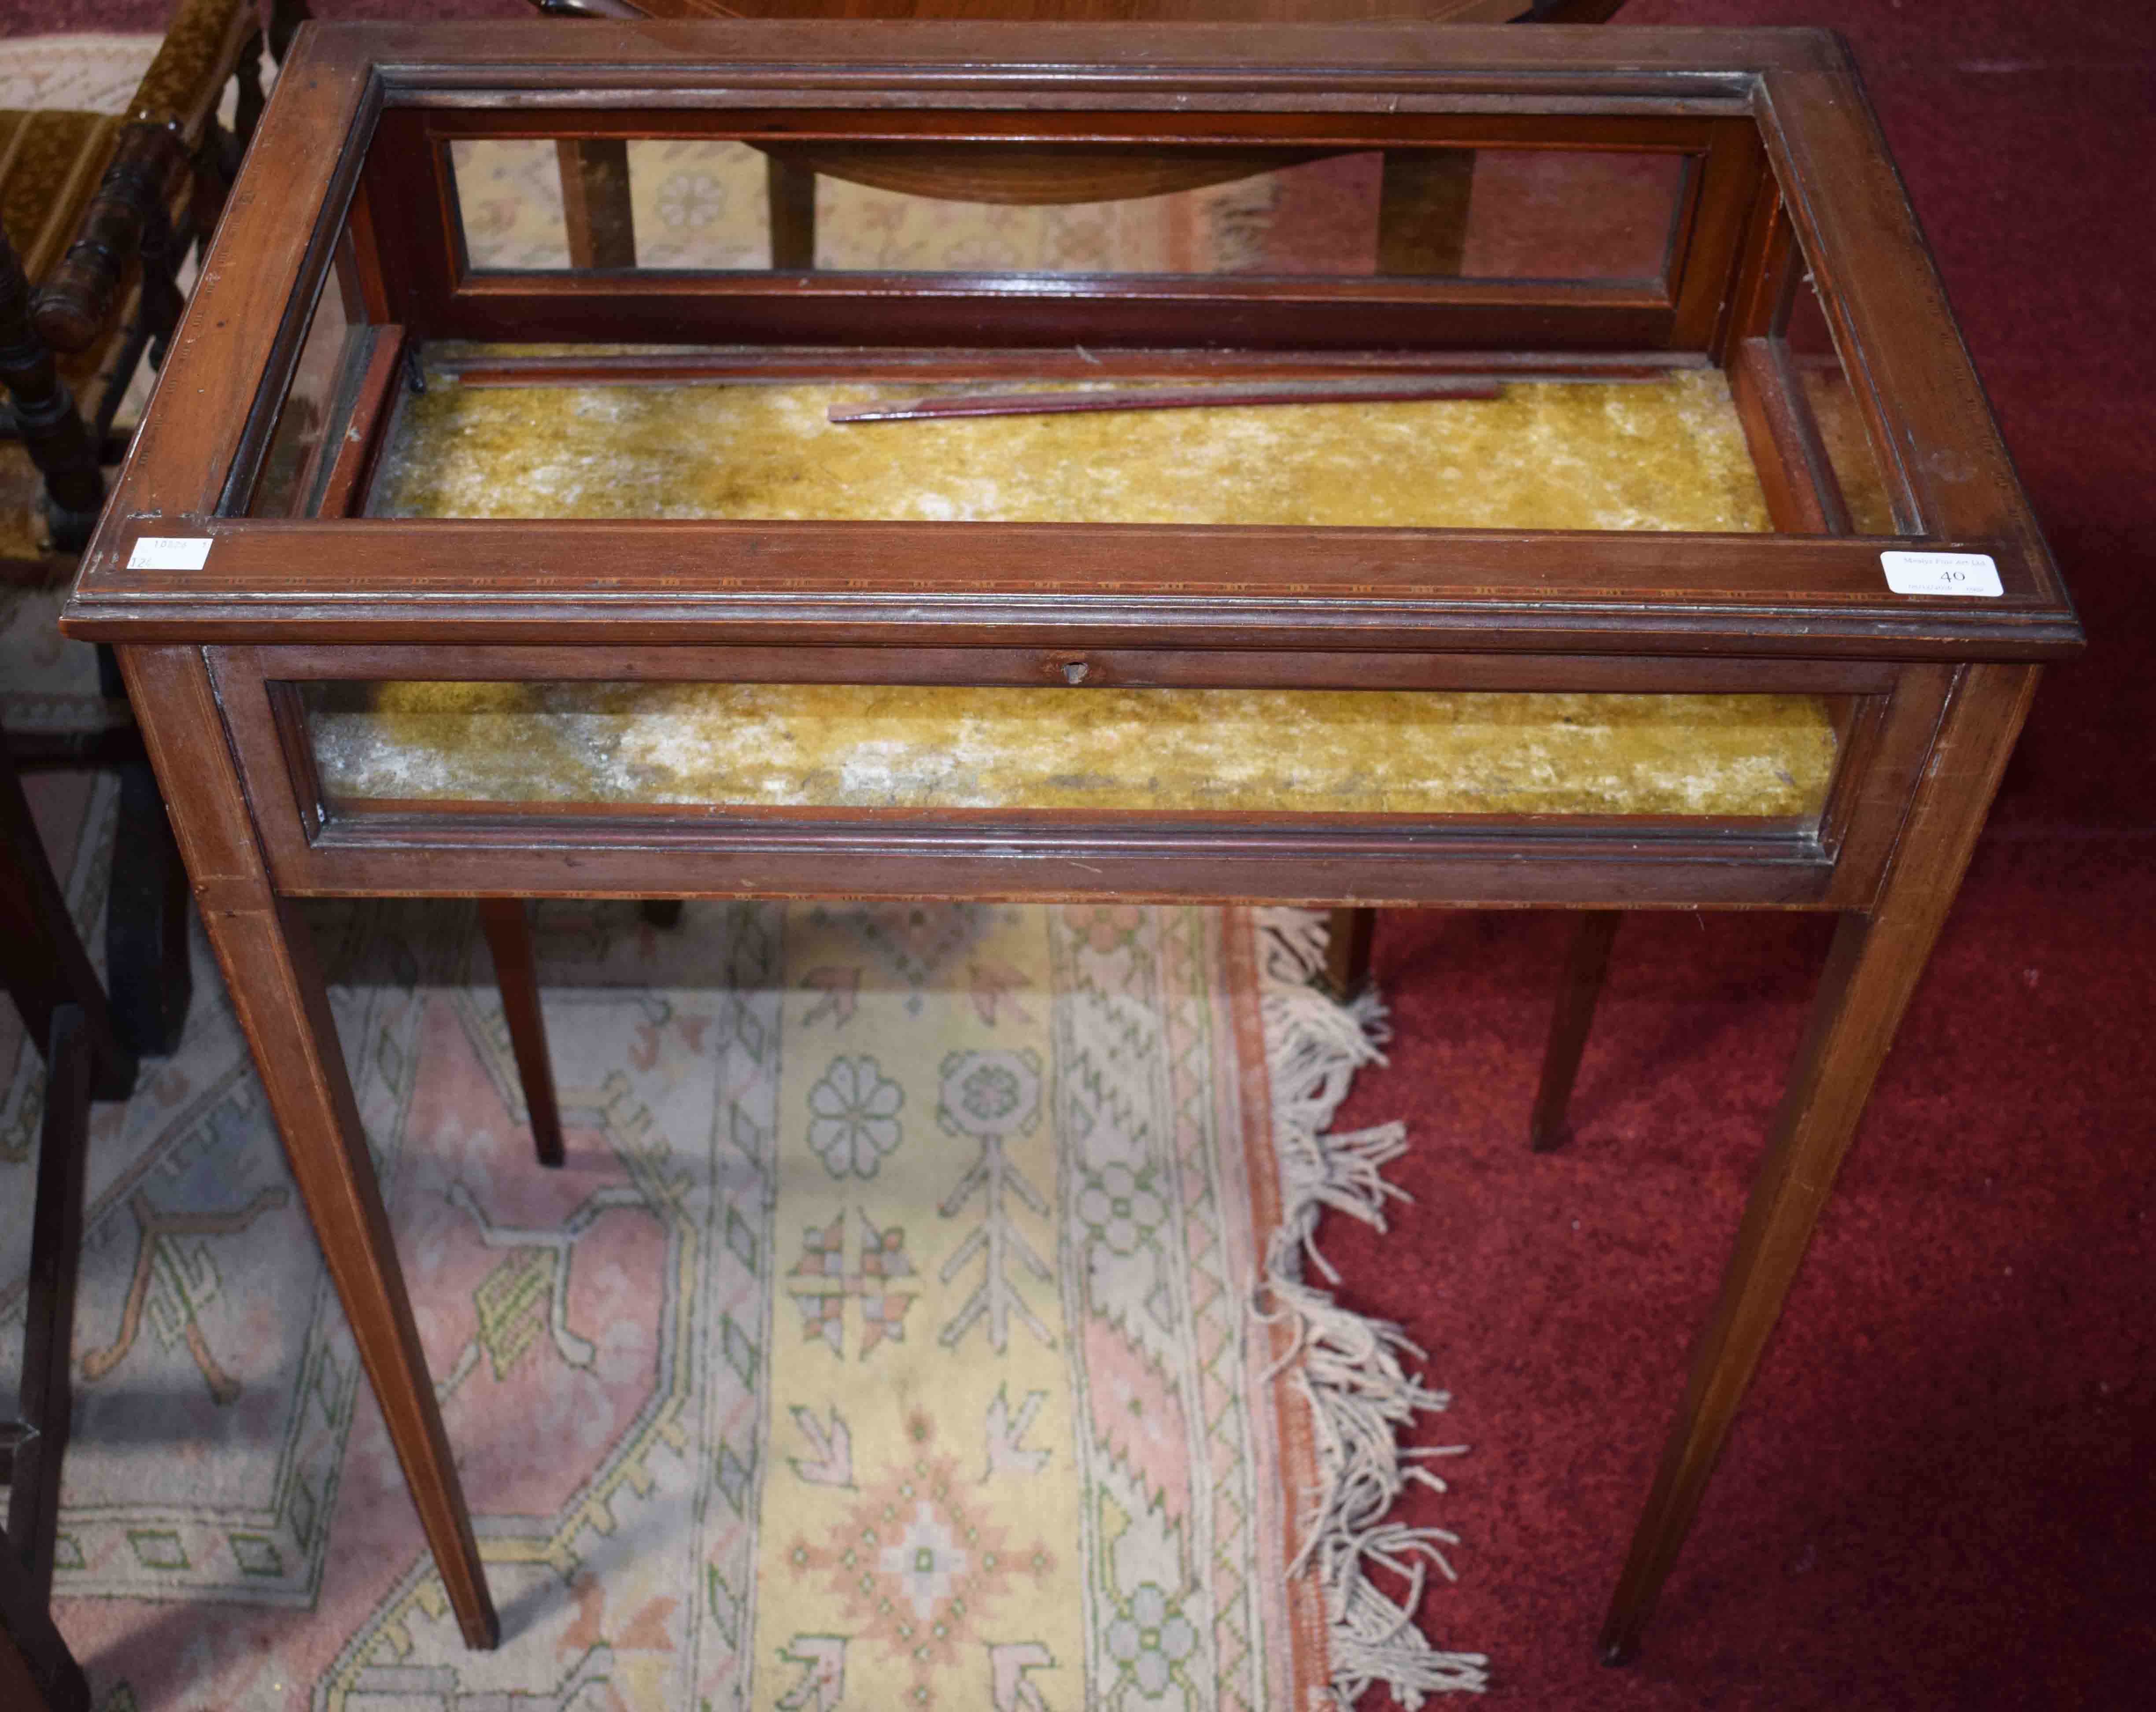 AN EDWARDIAN INLAID MAHOGANY BIJOUTERIE TABLE, the hinged top lacking its glass plate,